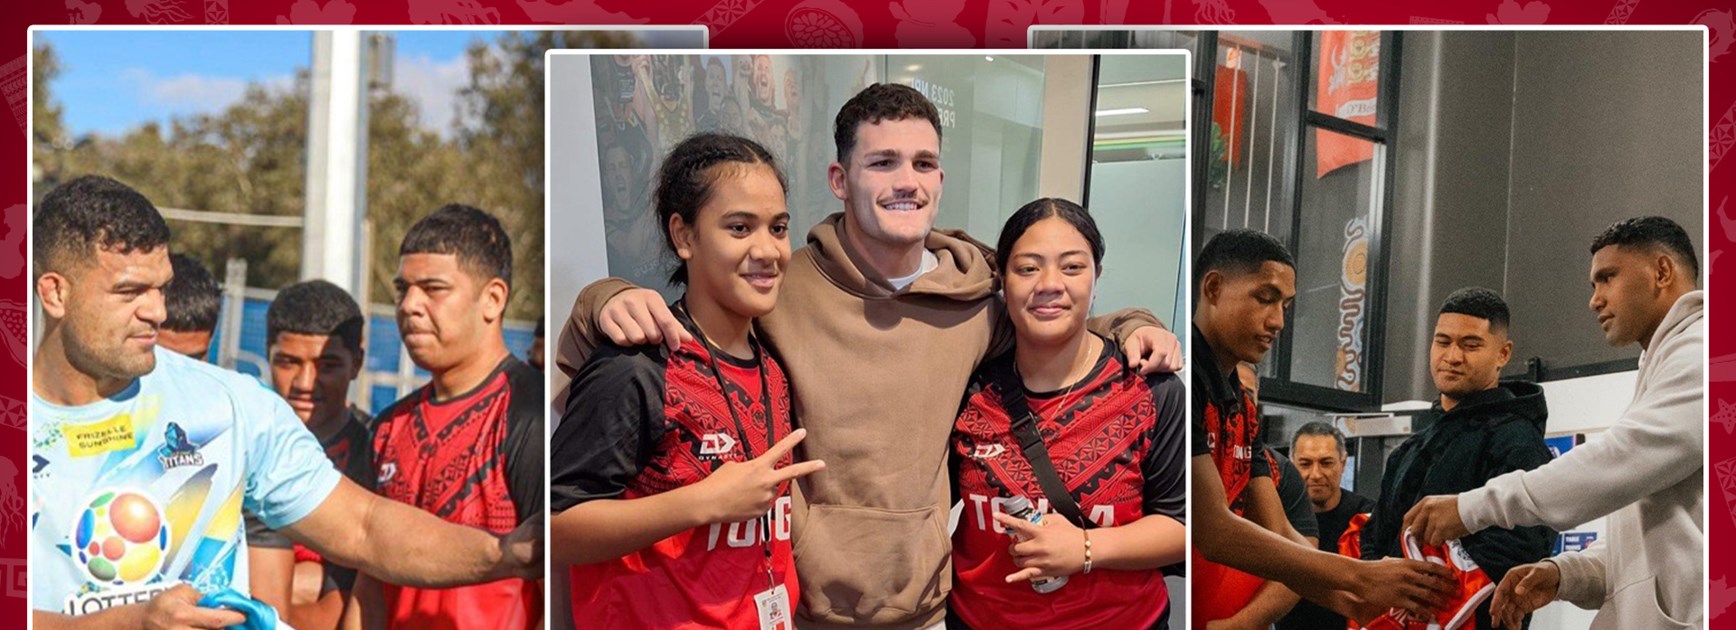 NRL clubs eye Tongan talent as schools tour inspires participation explosion